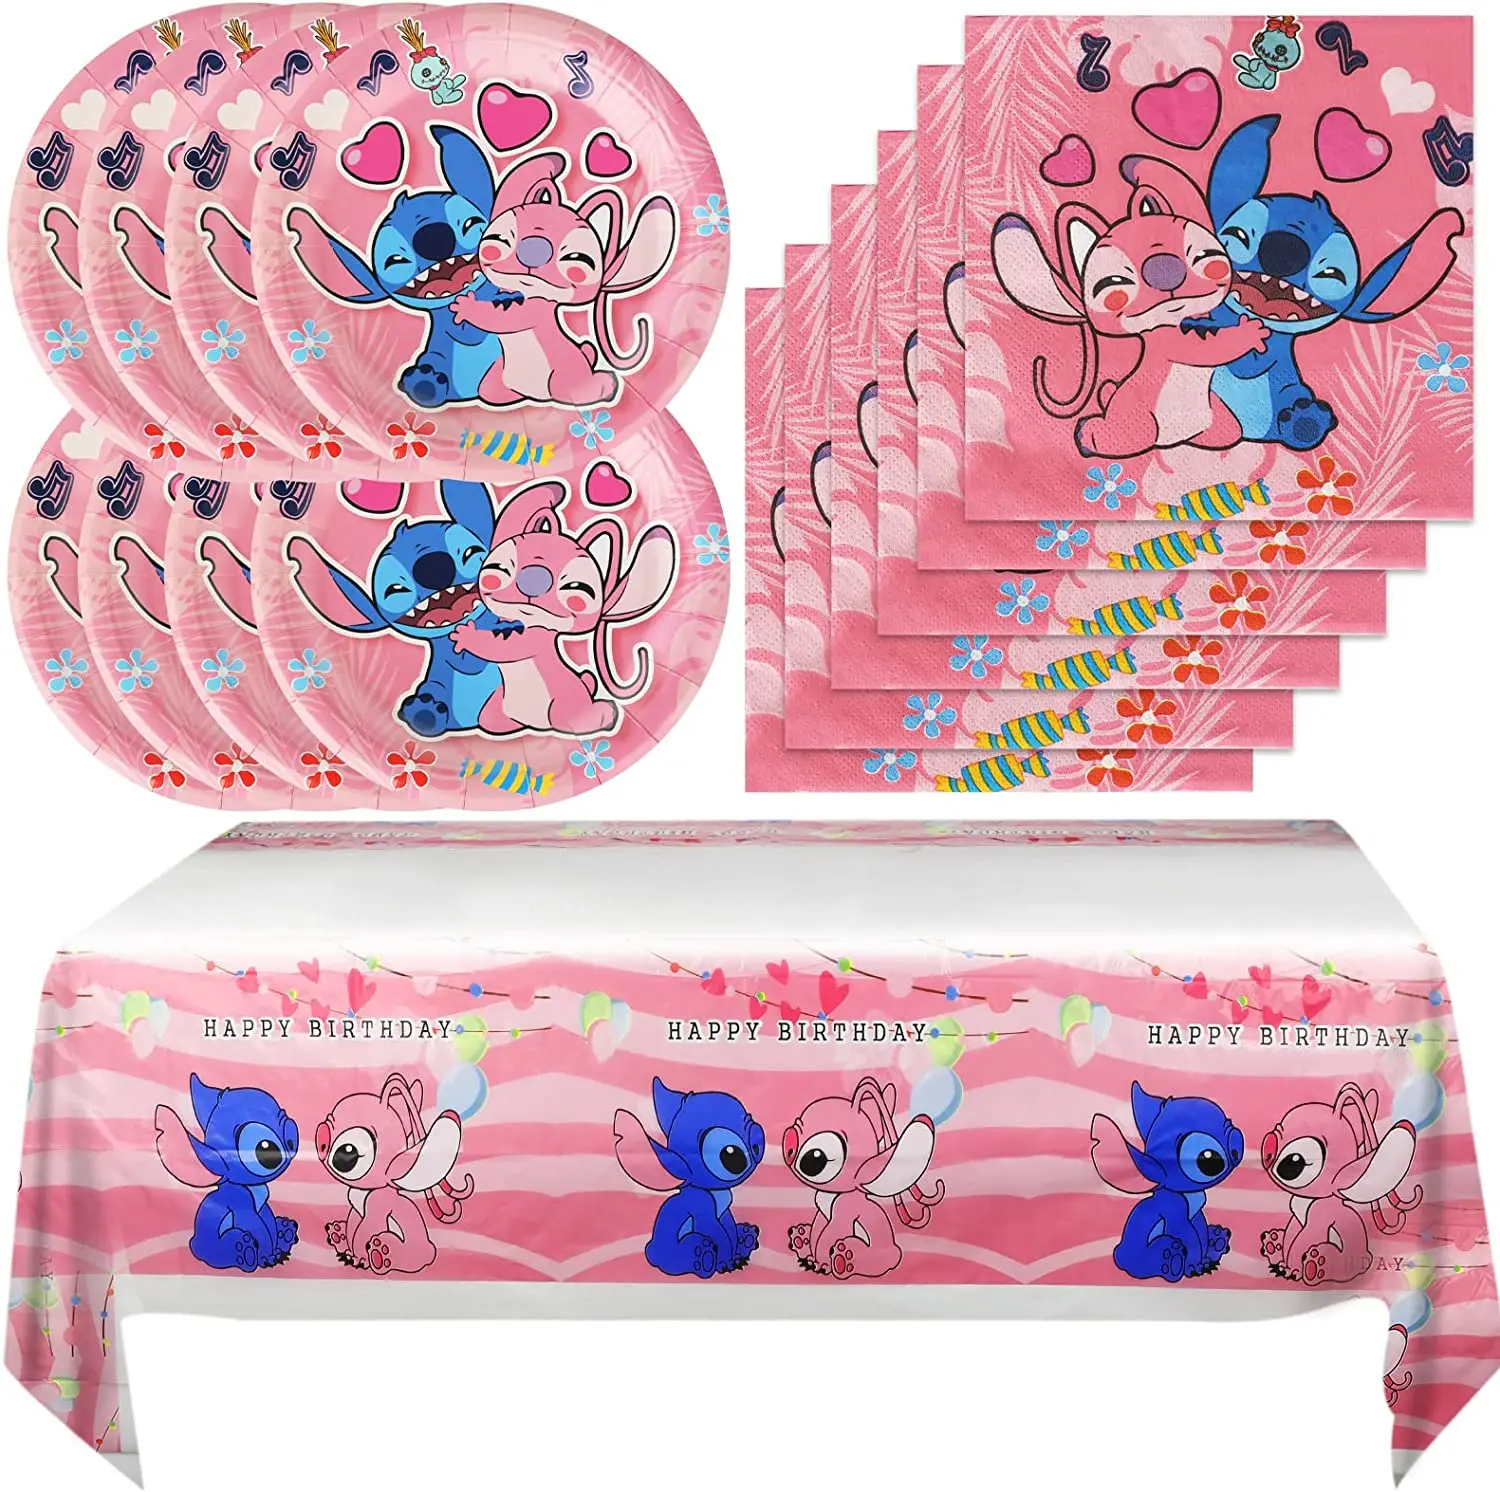 

10People Pink Lilo Stitch Birthday Party Decorations Disposable Tableware Set Stitch Angel For Girls Baby Shower Supplies Toys